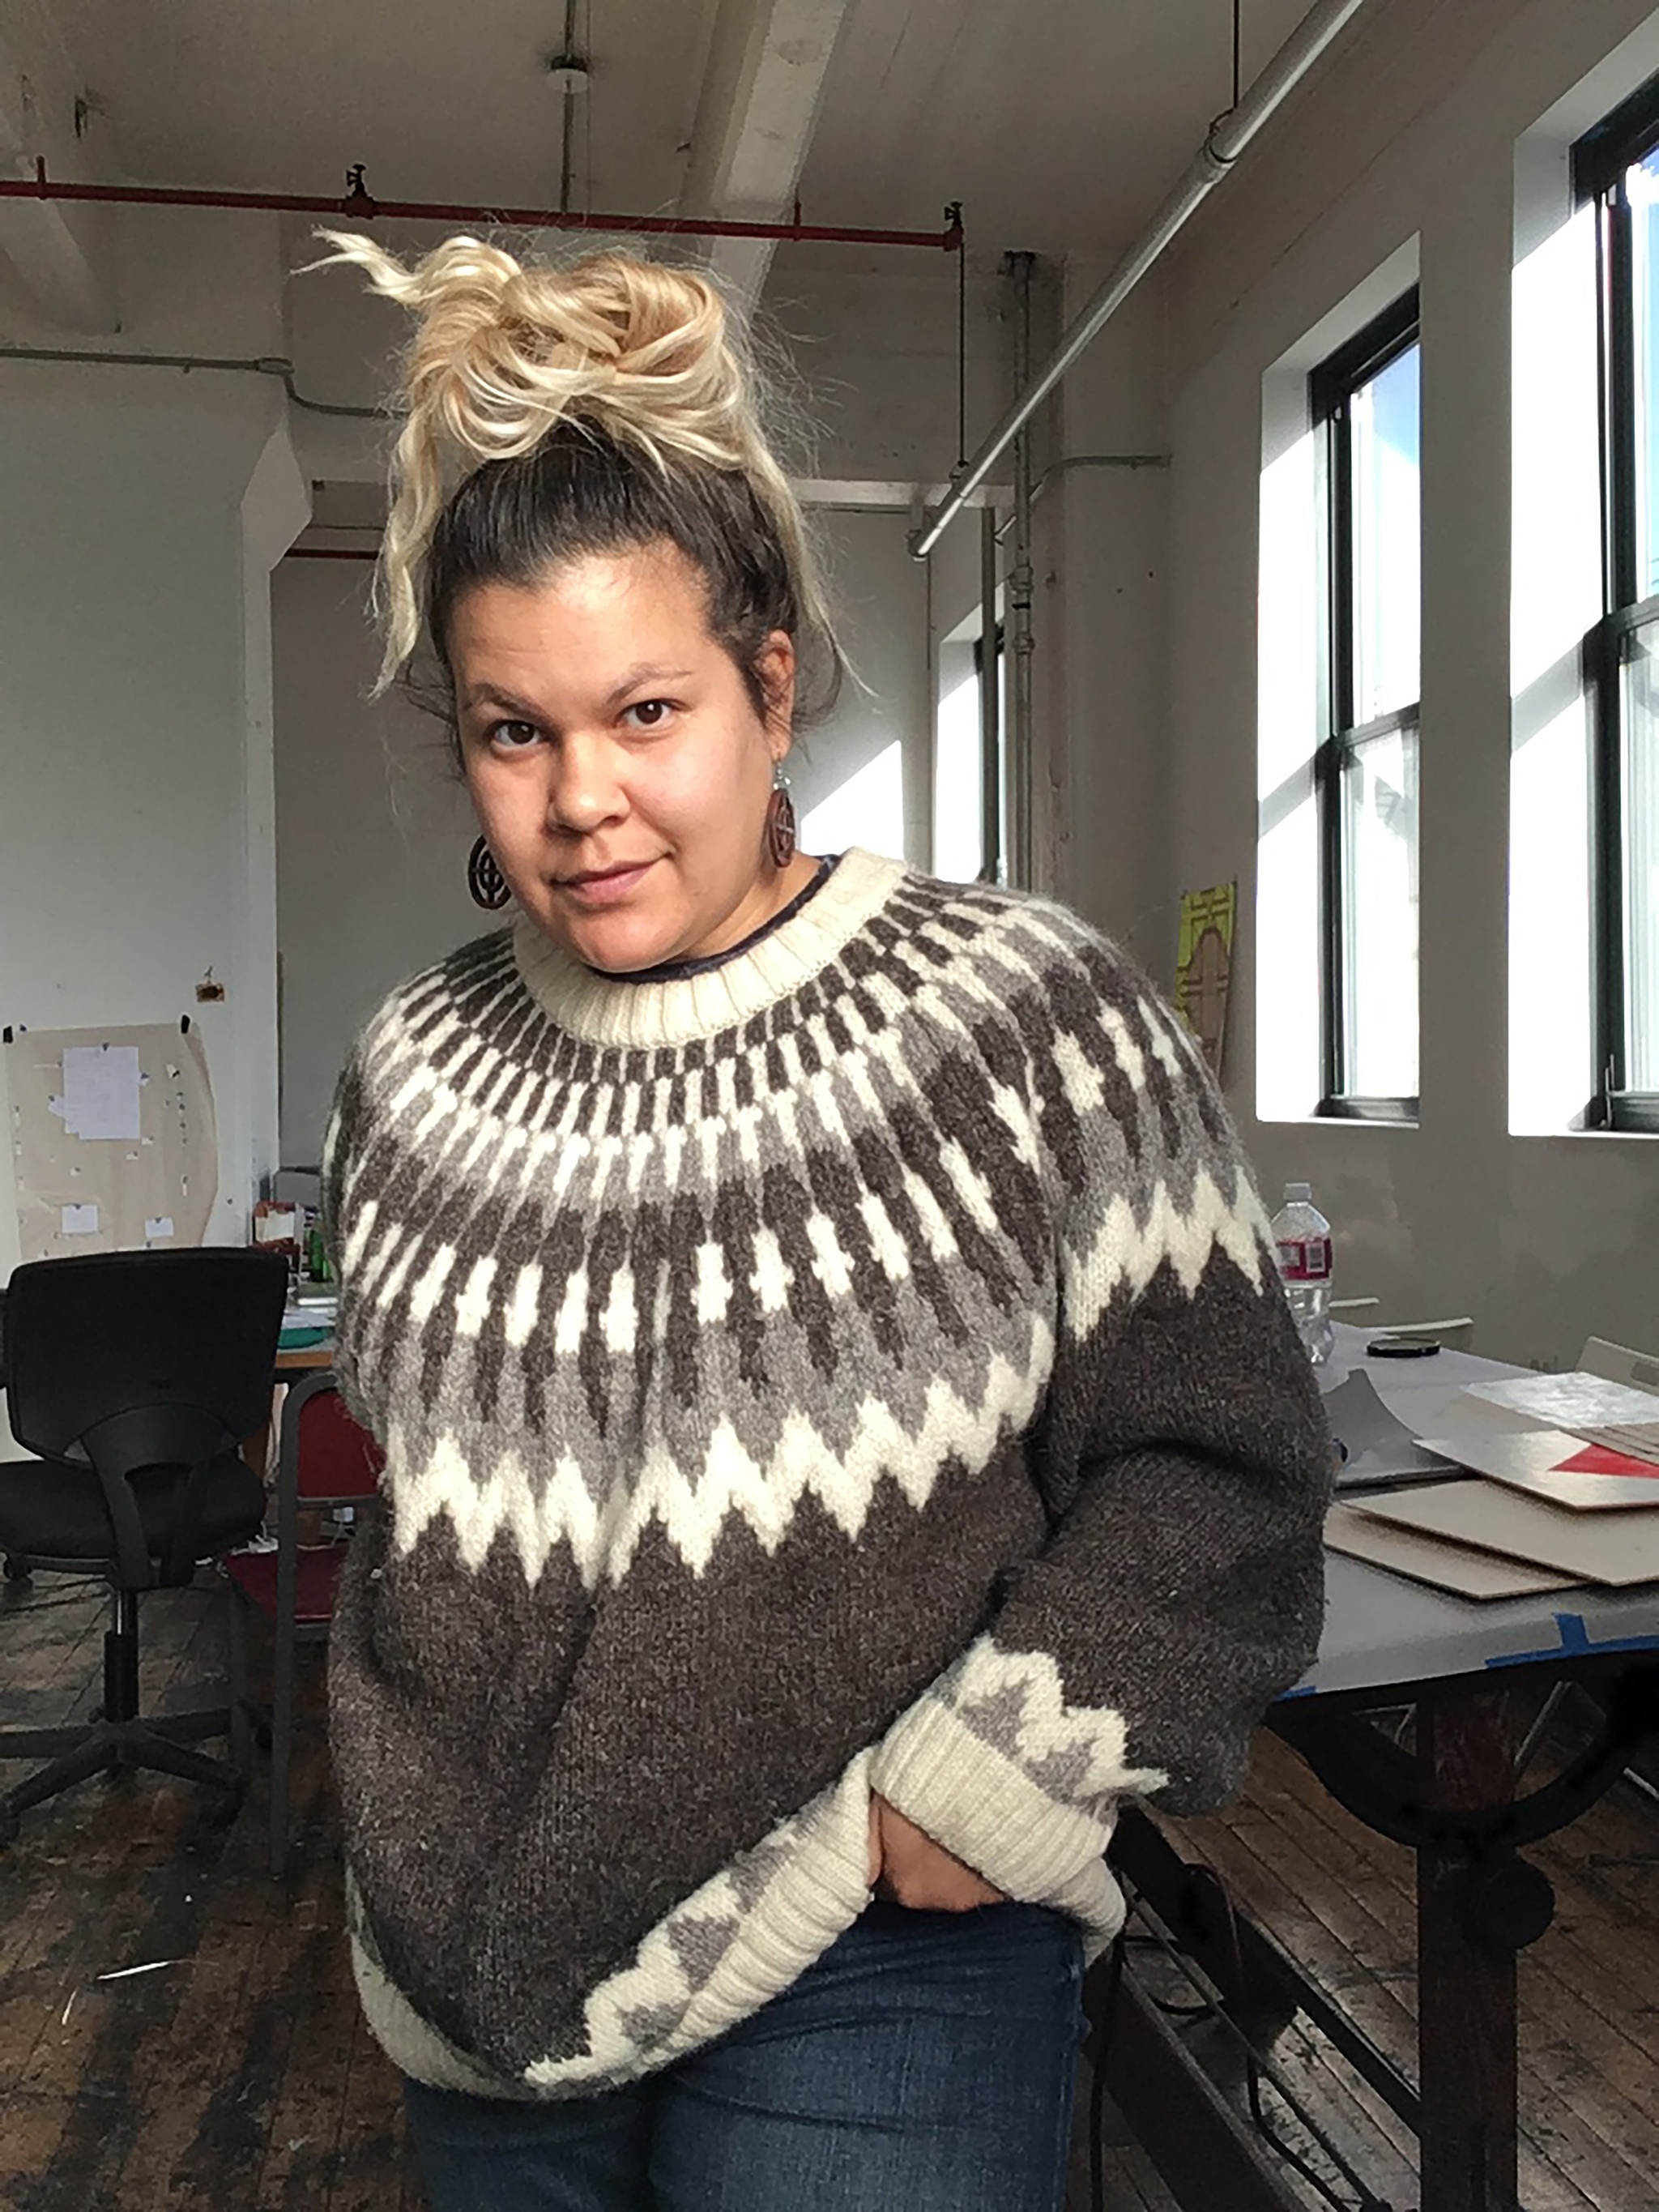 A photo of artist Heather Hunt standing with one hand in her pocket in what appears to be a studio or workspace. She wears an oversized sweater and has her two-tone dyed hair pulled up messily at the top of her head. 